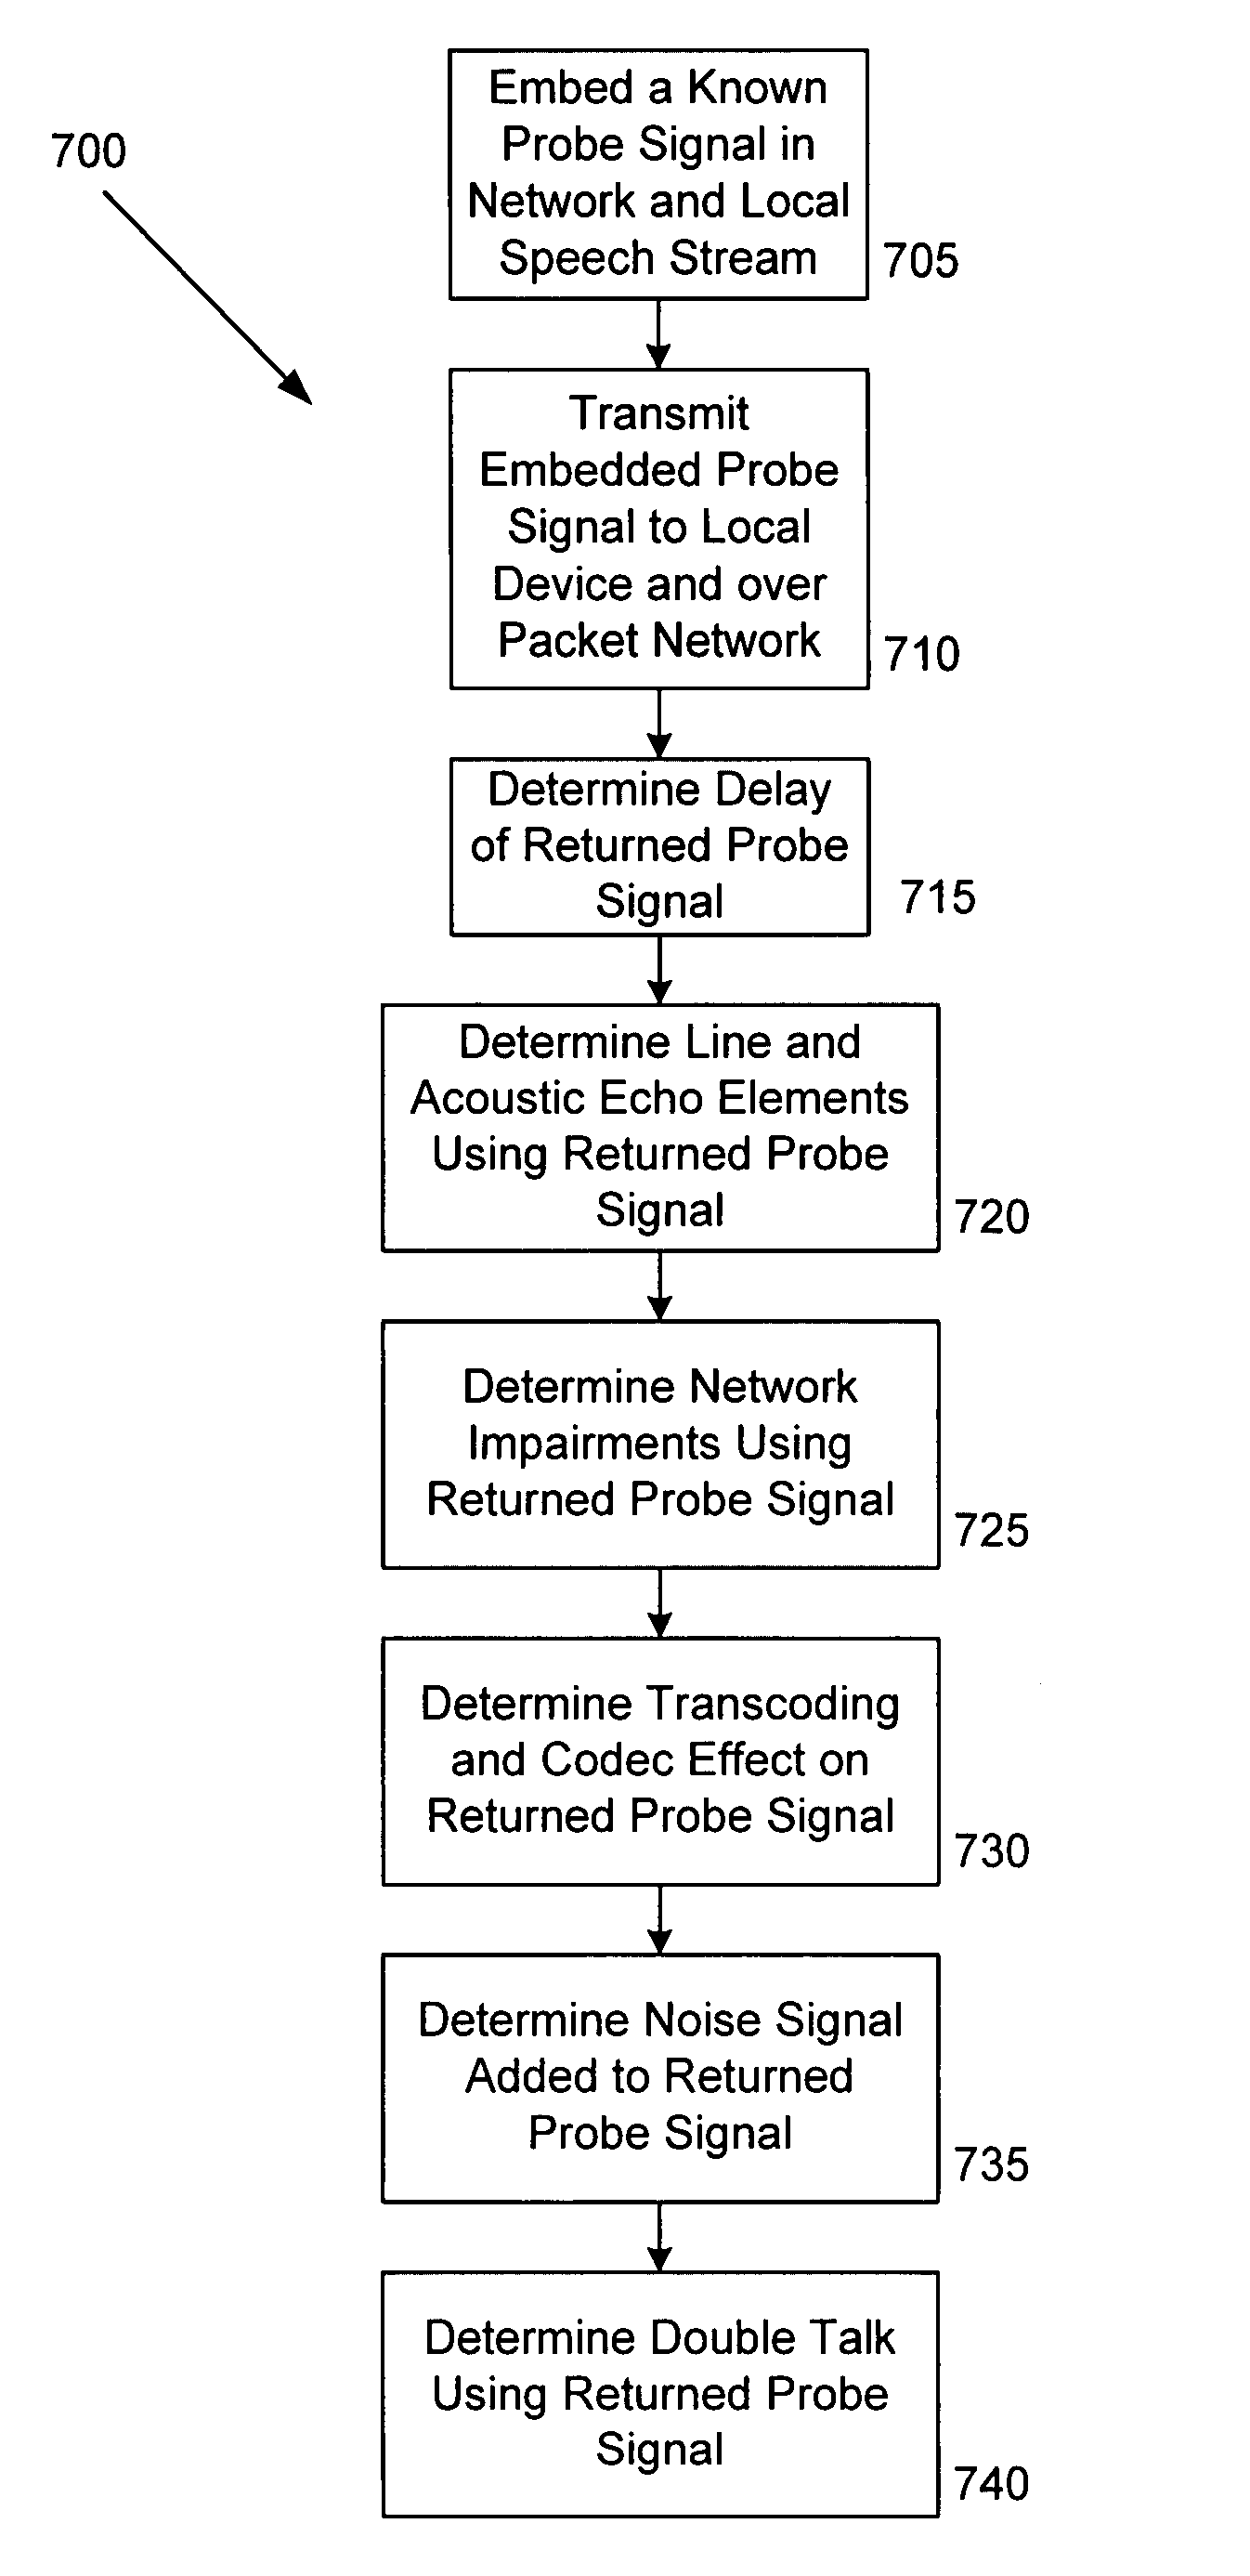 Method and apparatus for quantifying, predicting and monitoring the conversational quality